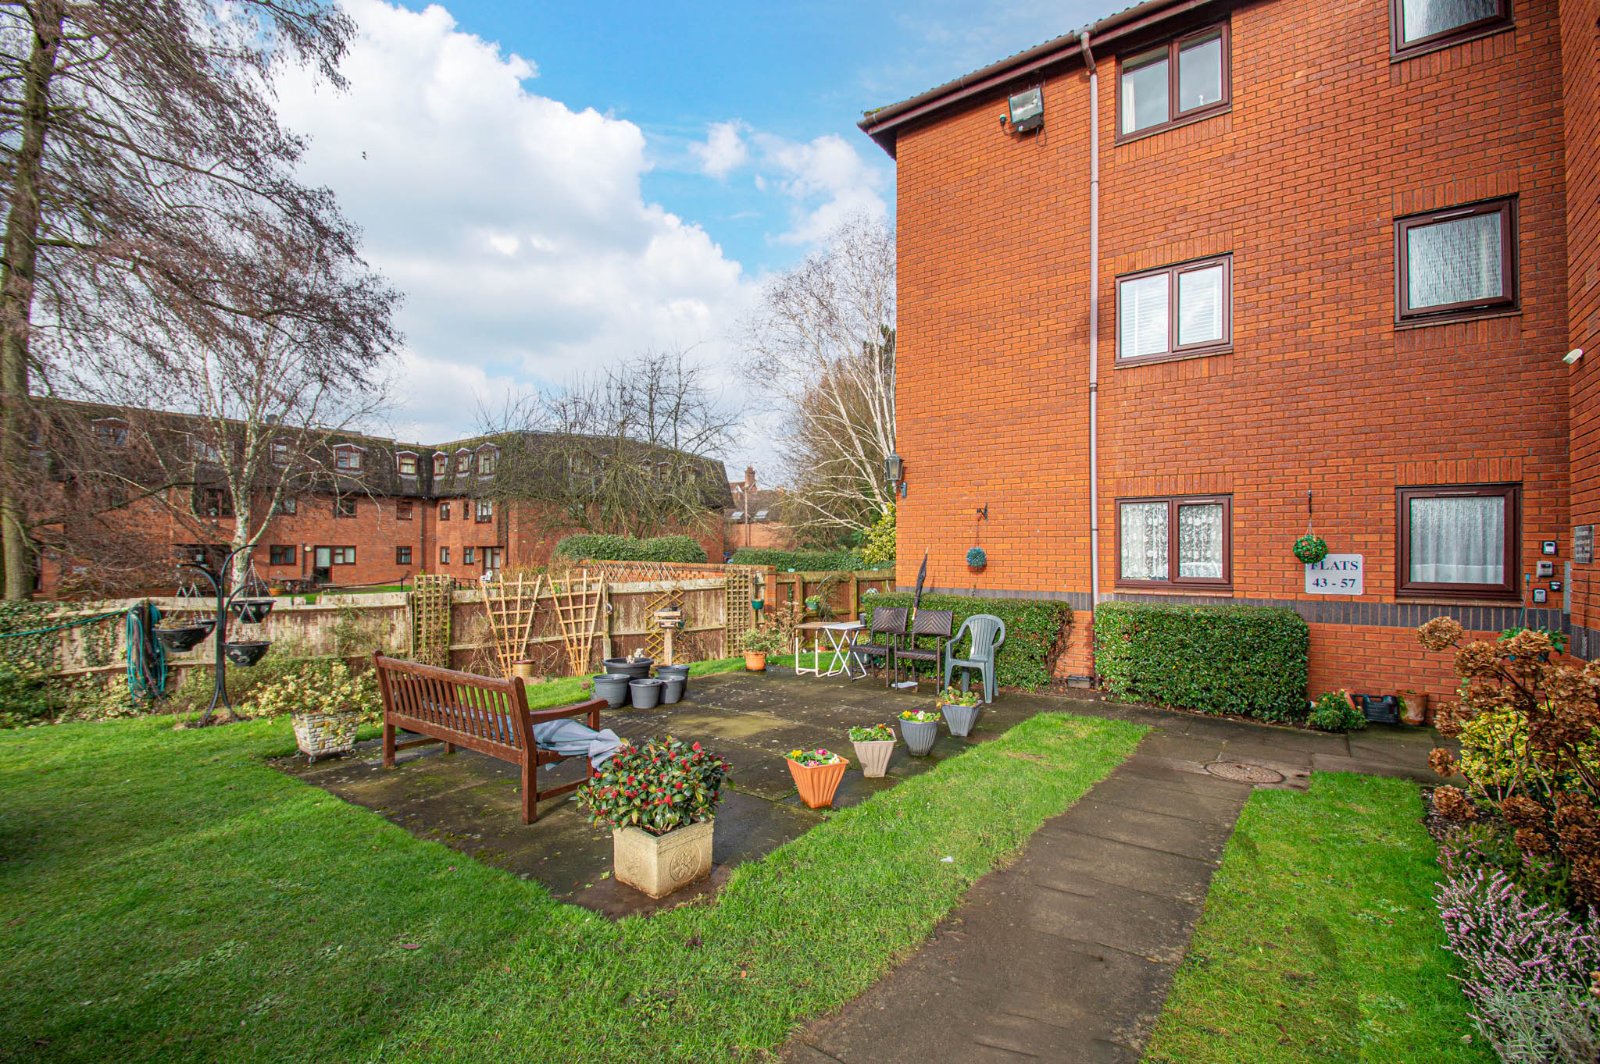 1 bed  for sale in Housman Park, Bromsgrove 10